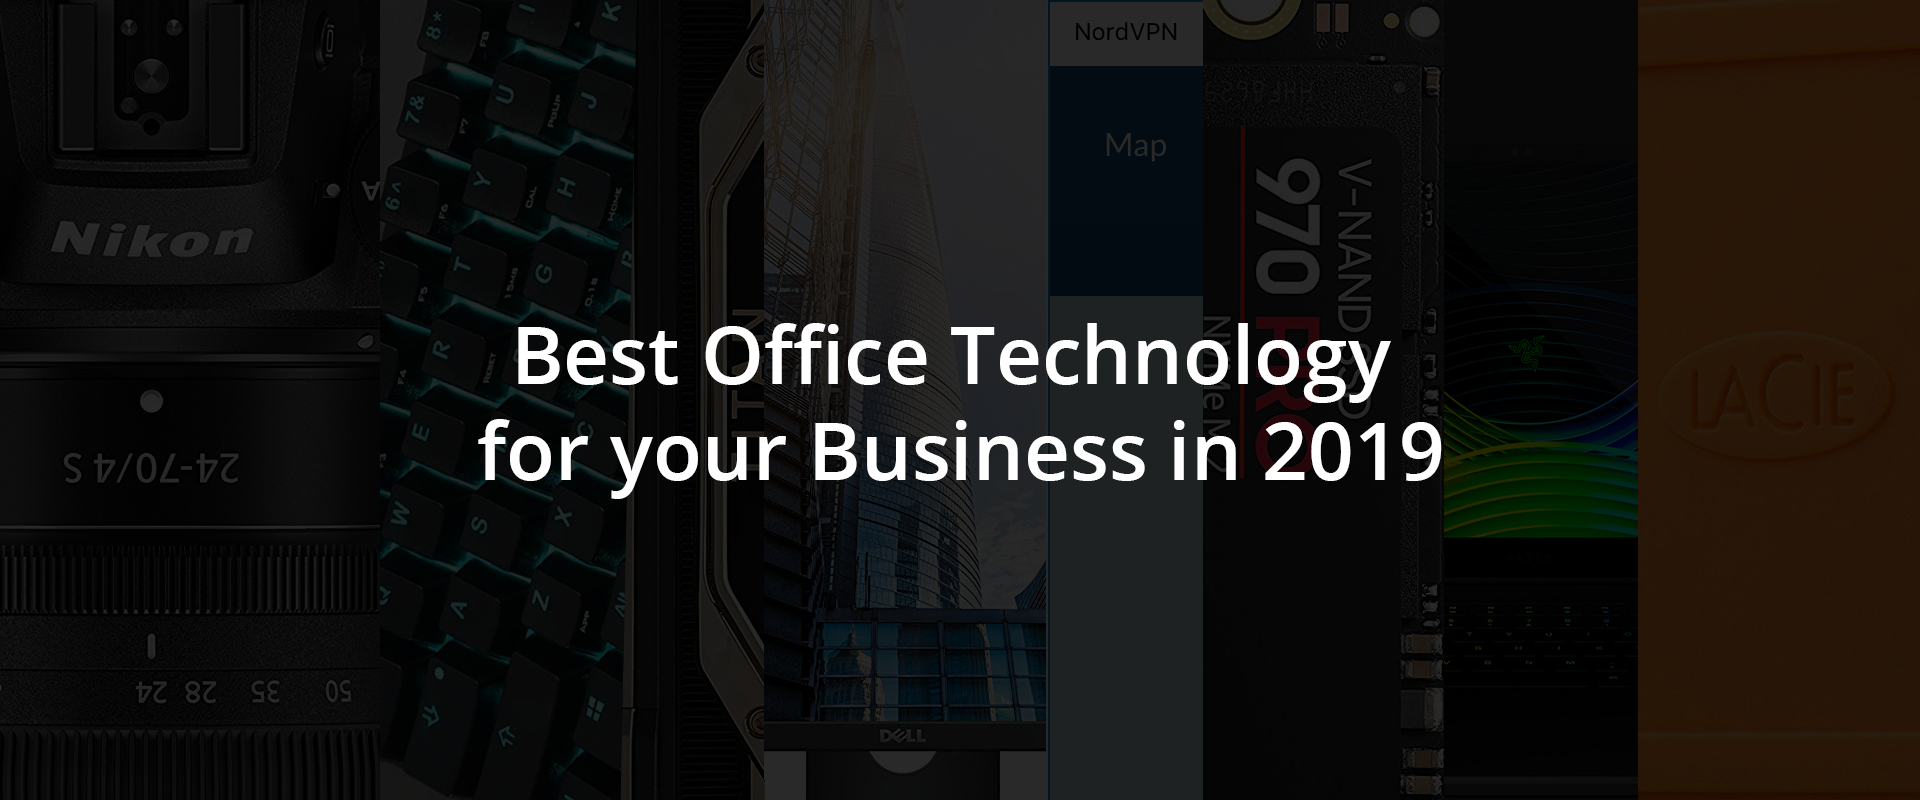 Best Office Technology for Business in 2019 | A curated list by Praxis Technologies Digital Marketing and Branding Agency